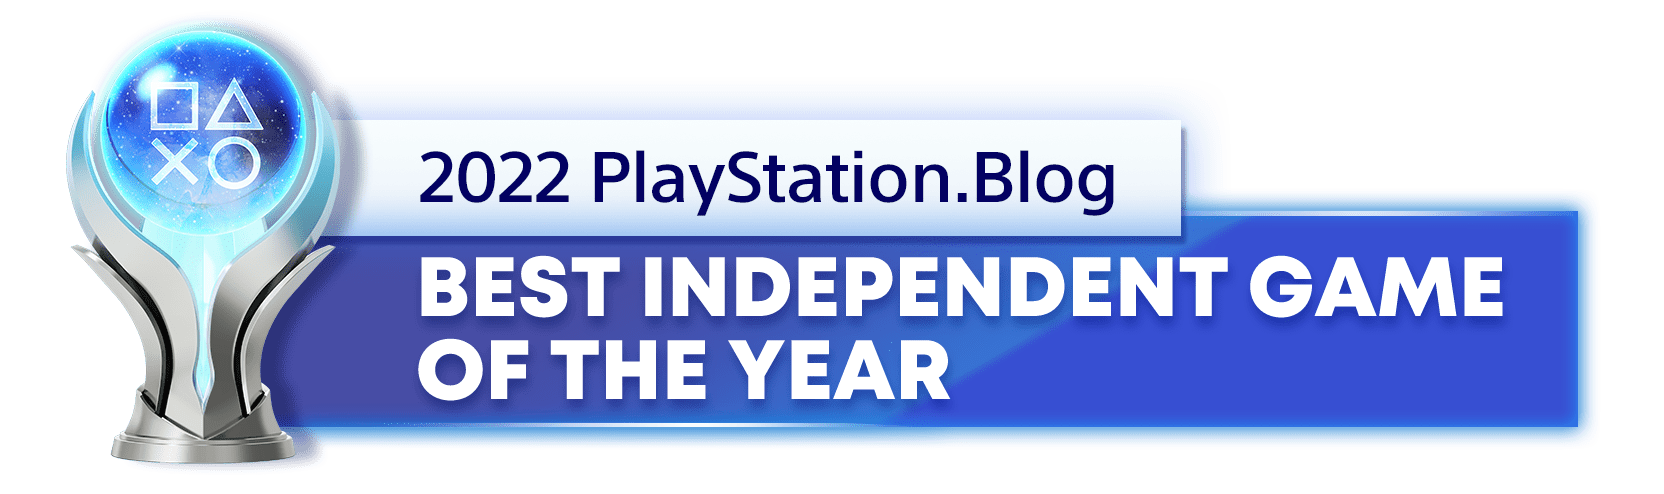 Game of the Year 2022 – Best PlayStation Game